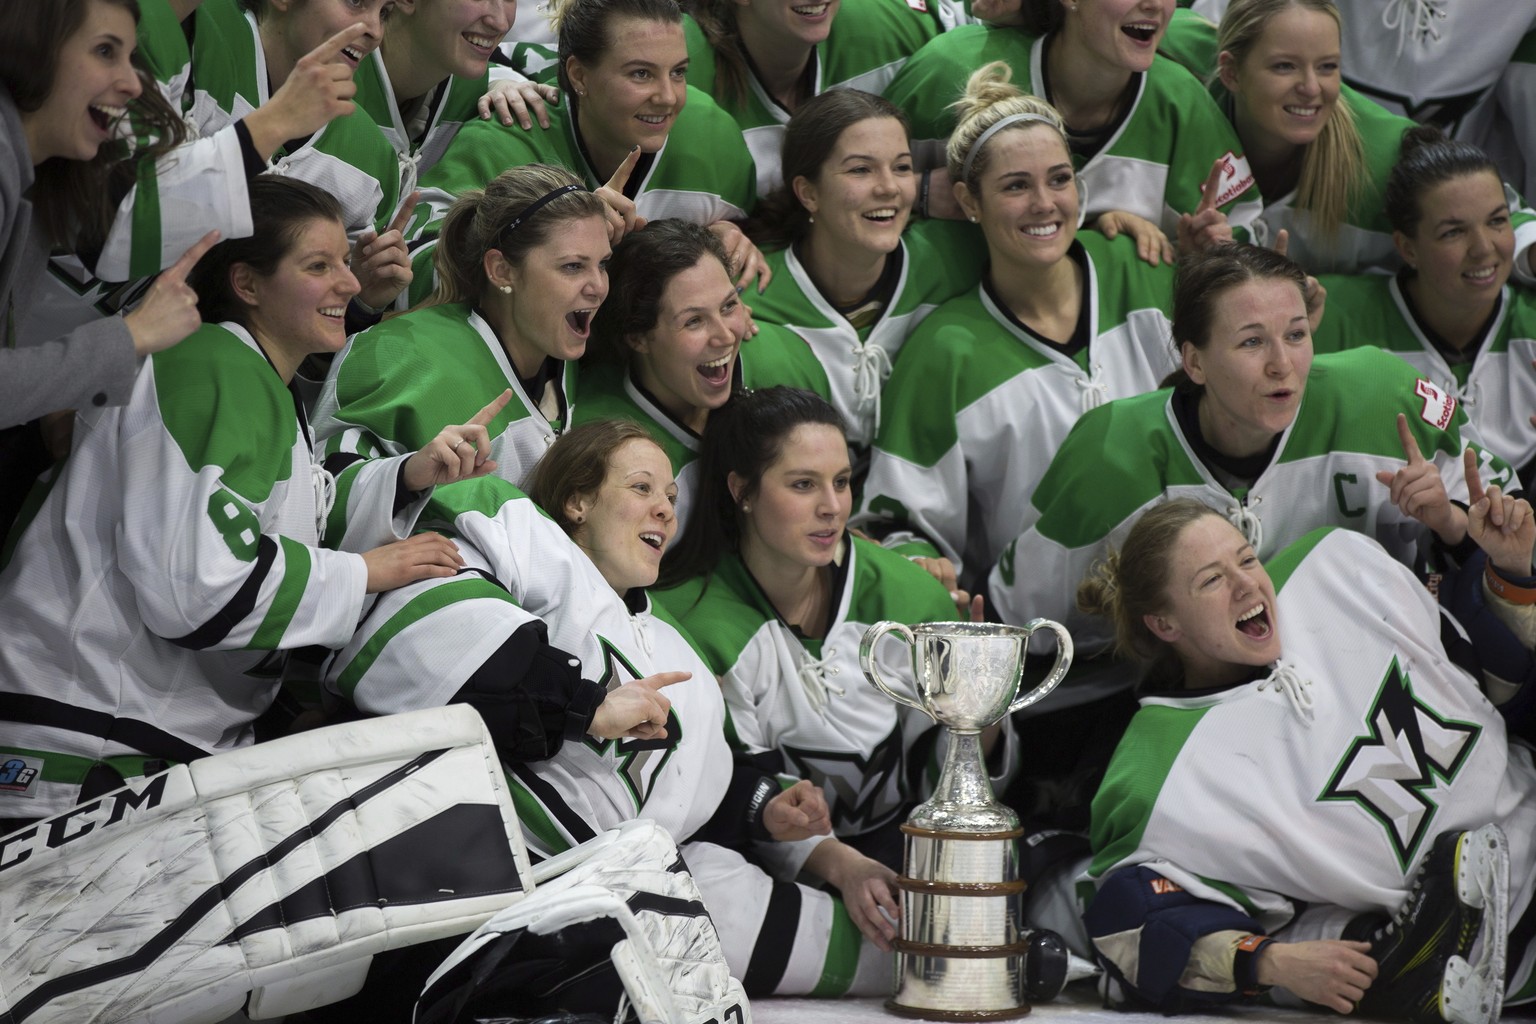 Markham Thunder players celebrate winning the 2018 Clarkson Cup final against the Kunlun Red Star in CWHL hockey action in Toronto on Sunday, March 25, 2018. (Chris Donovan/The Canadian Press via AP)